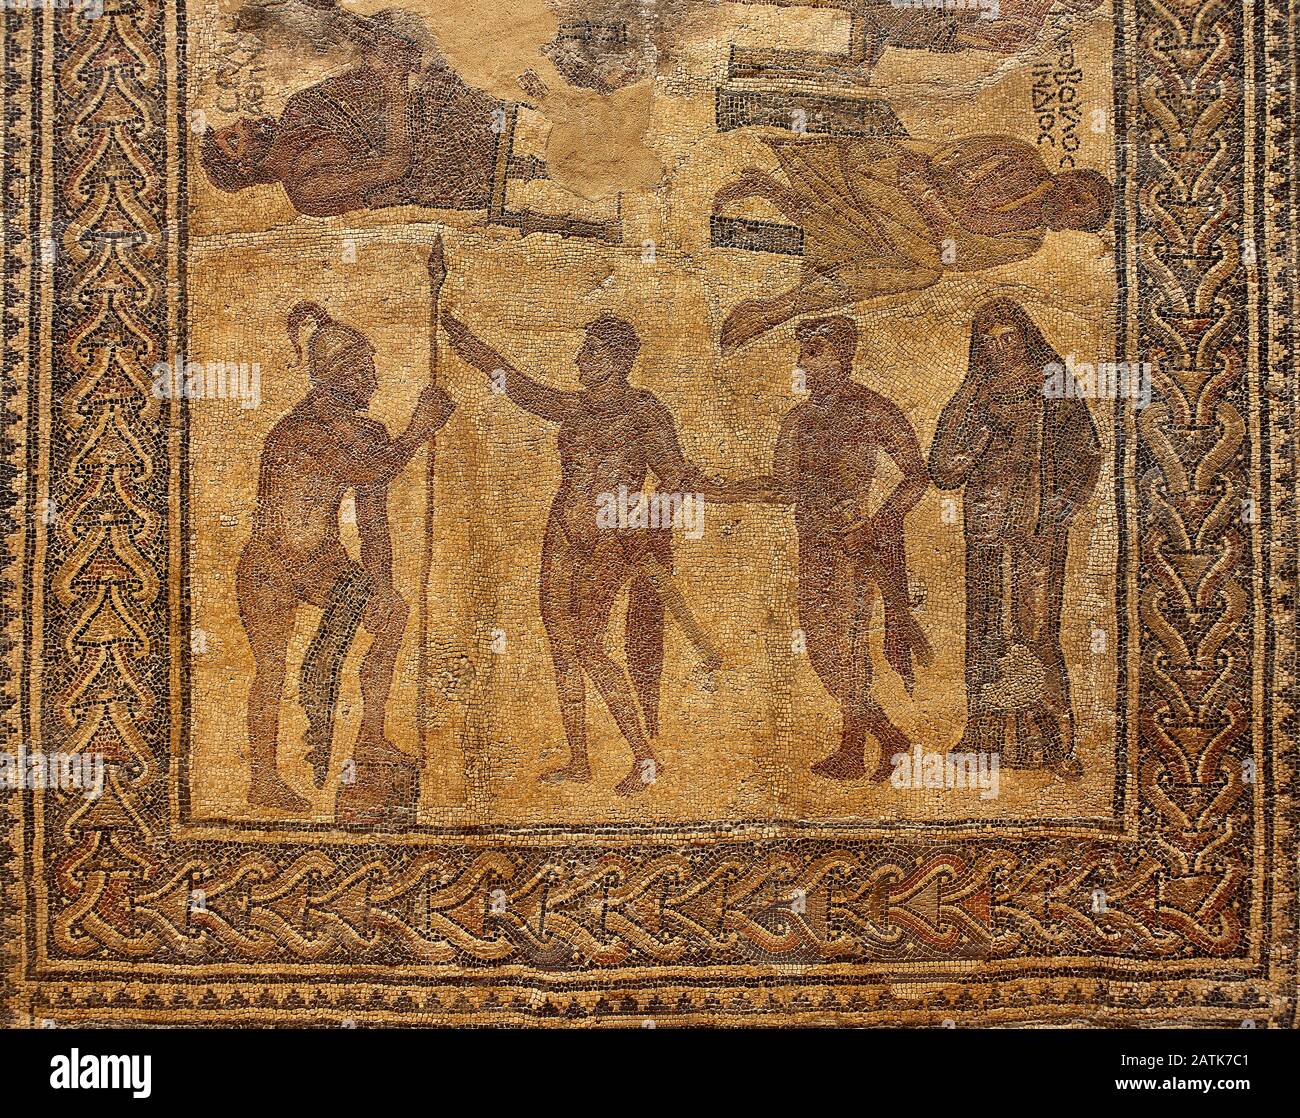 Mosaic of the Seven Sages. 4th century AD. It depicts a chapter of The Iliad. Briseis is returned to Achilles after being abducted by Agamemnon. Detail. National Museum of Roman Art. Merida. Extremadura. Spain. Stock Photo